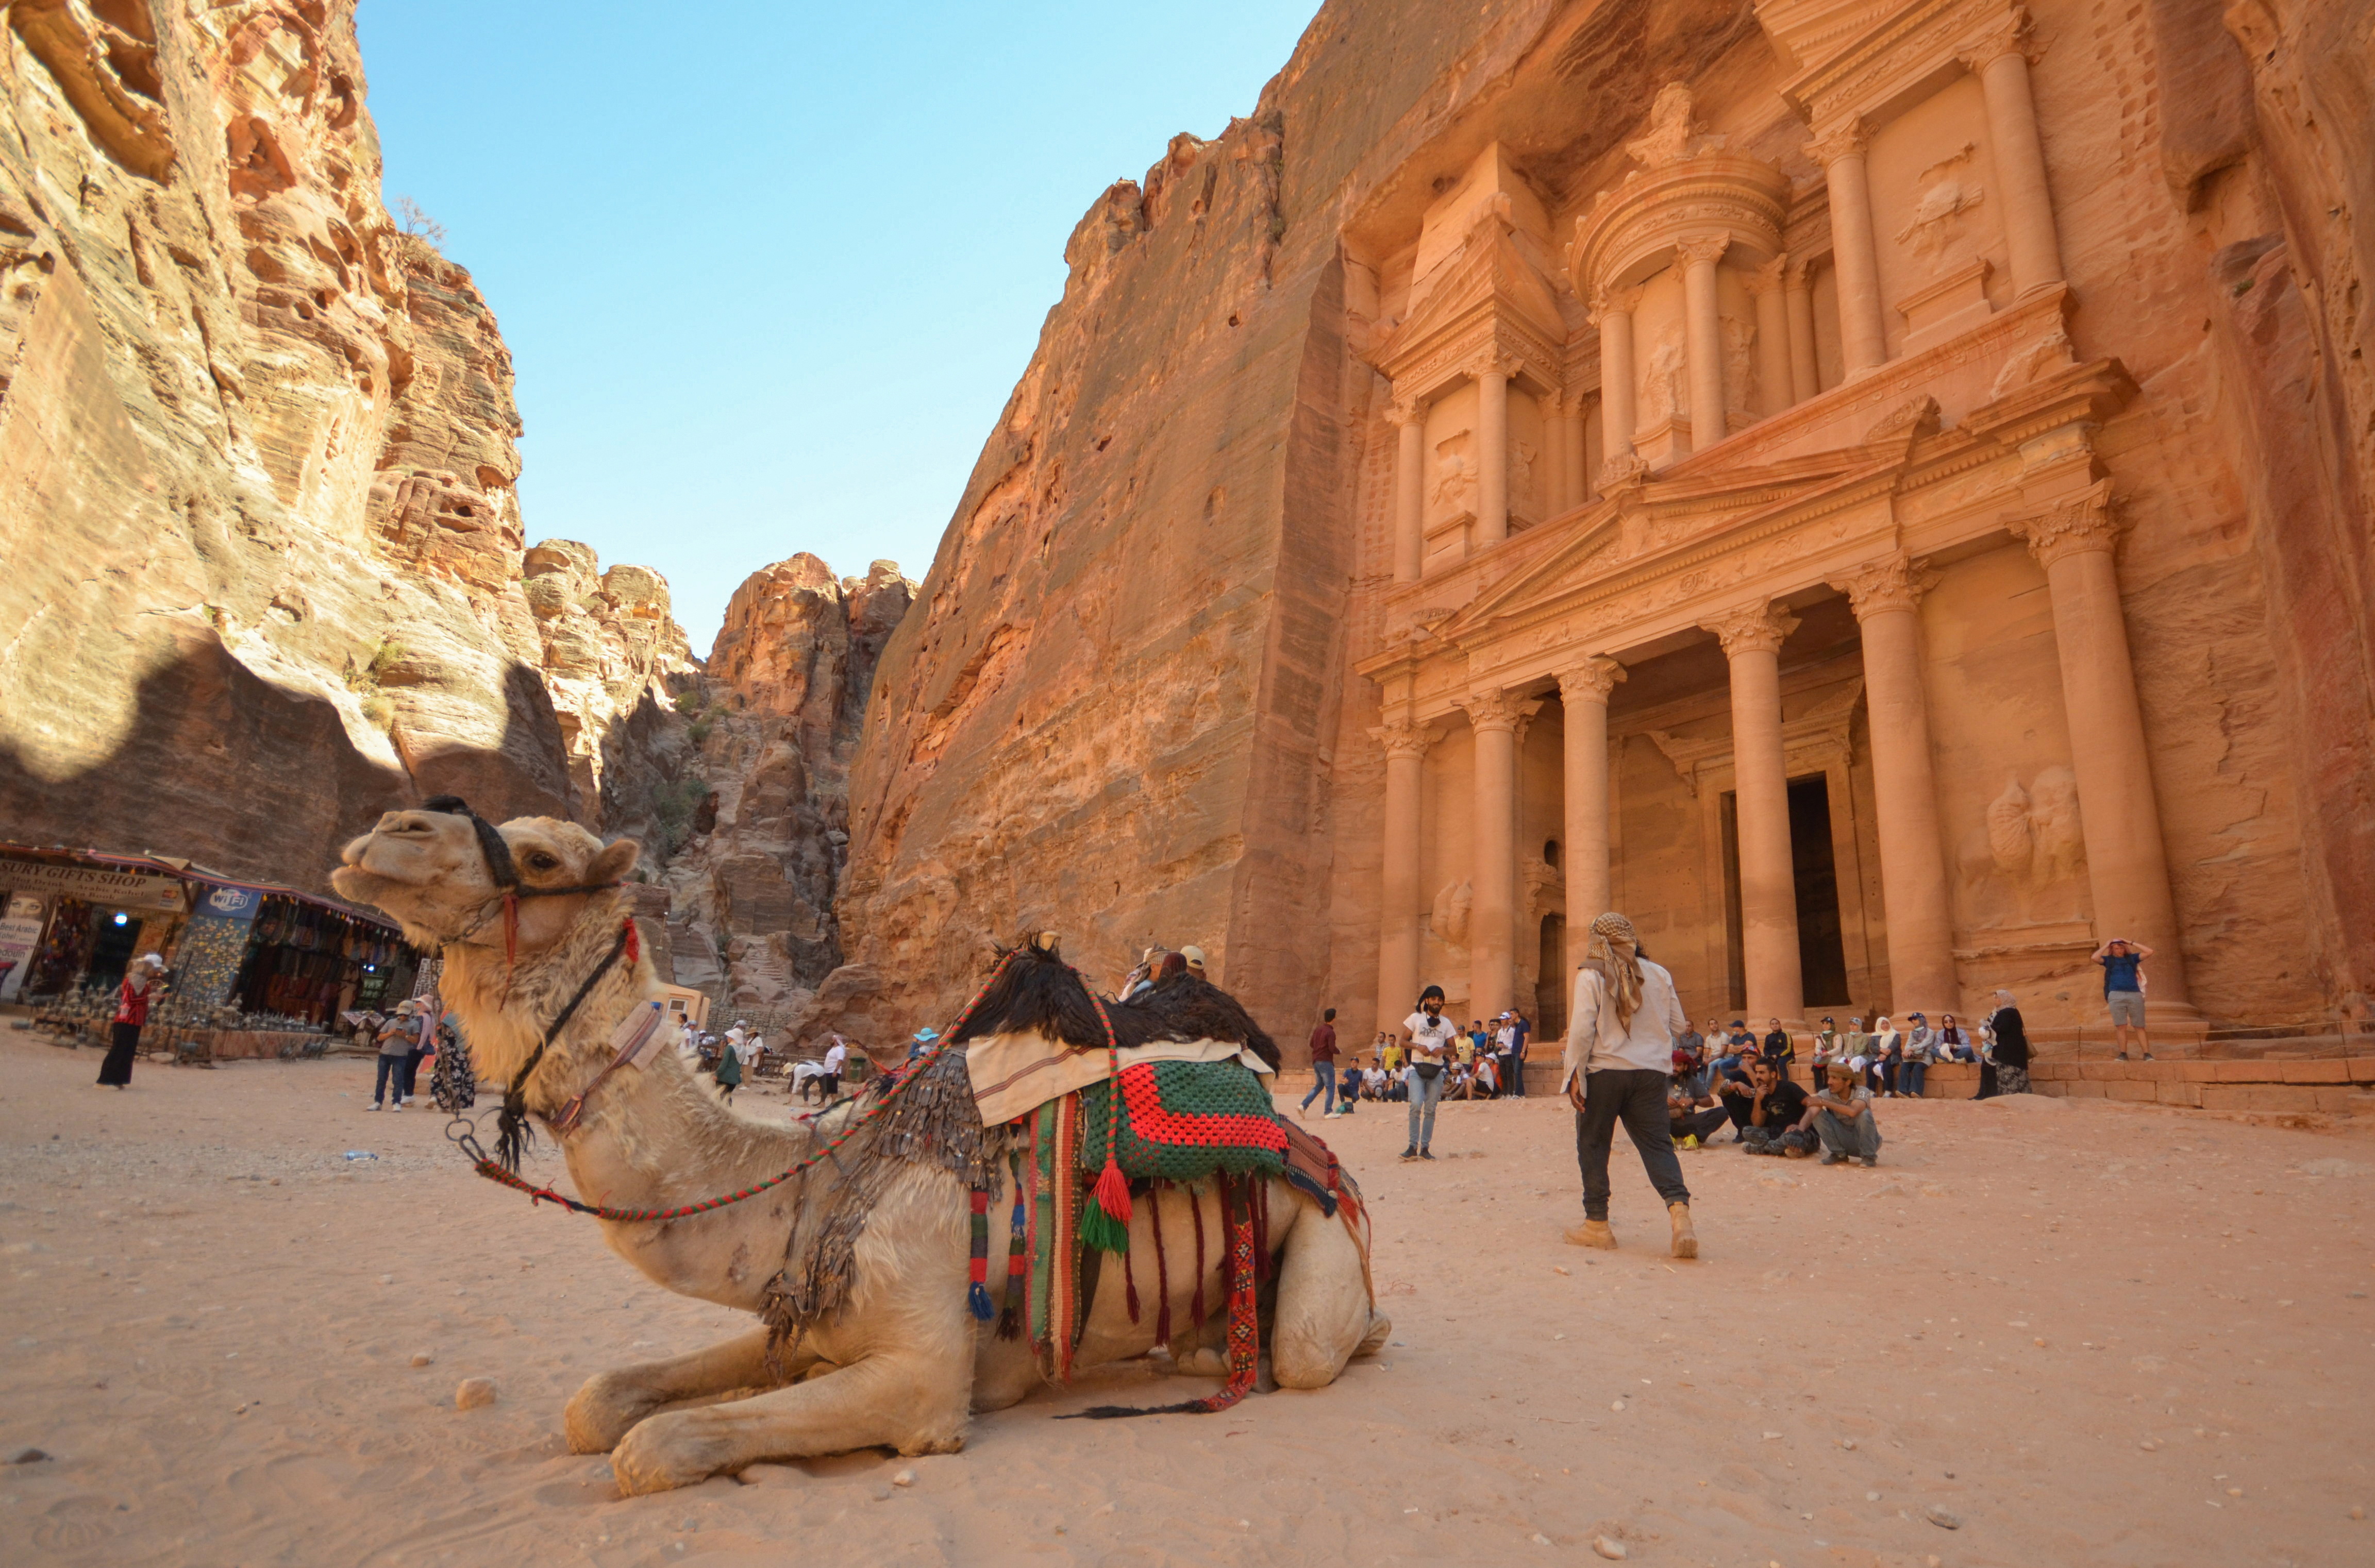 Tourists gather in front of the treasury site in the ancient city of Petra, Jordan July 2, 2021. Picture taken July 2, 2021. REUTERS/Muath Freij